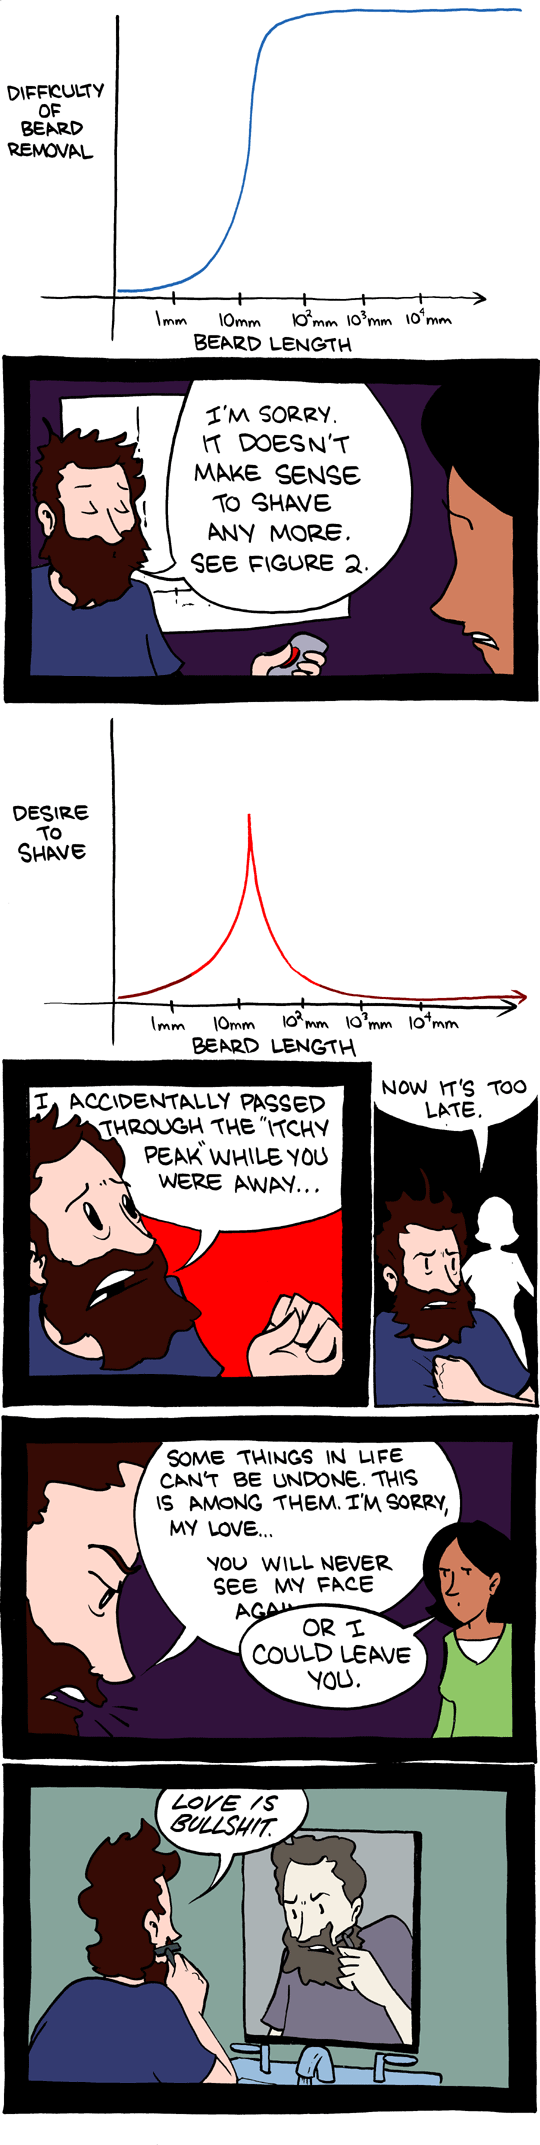 SMBC Comic - Shaving and the Itchy Peak